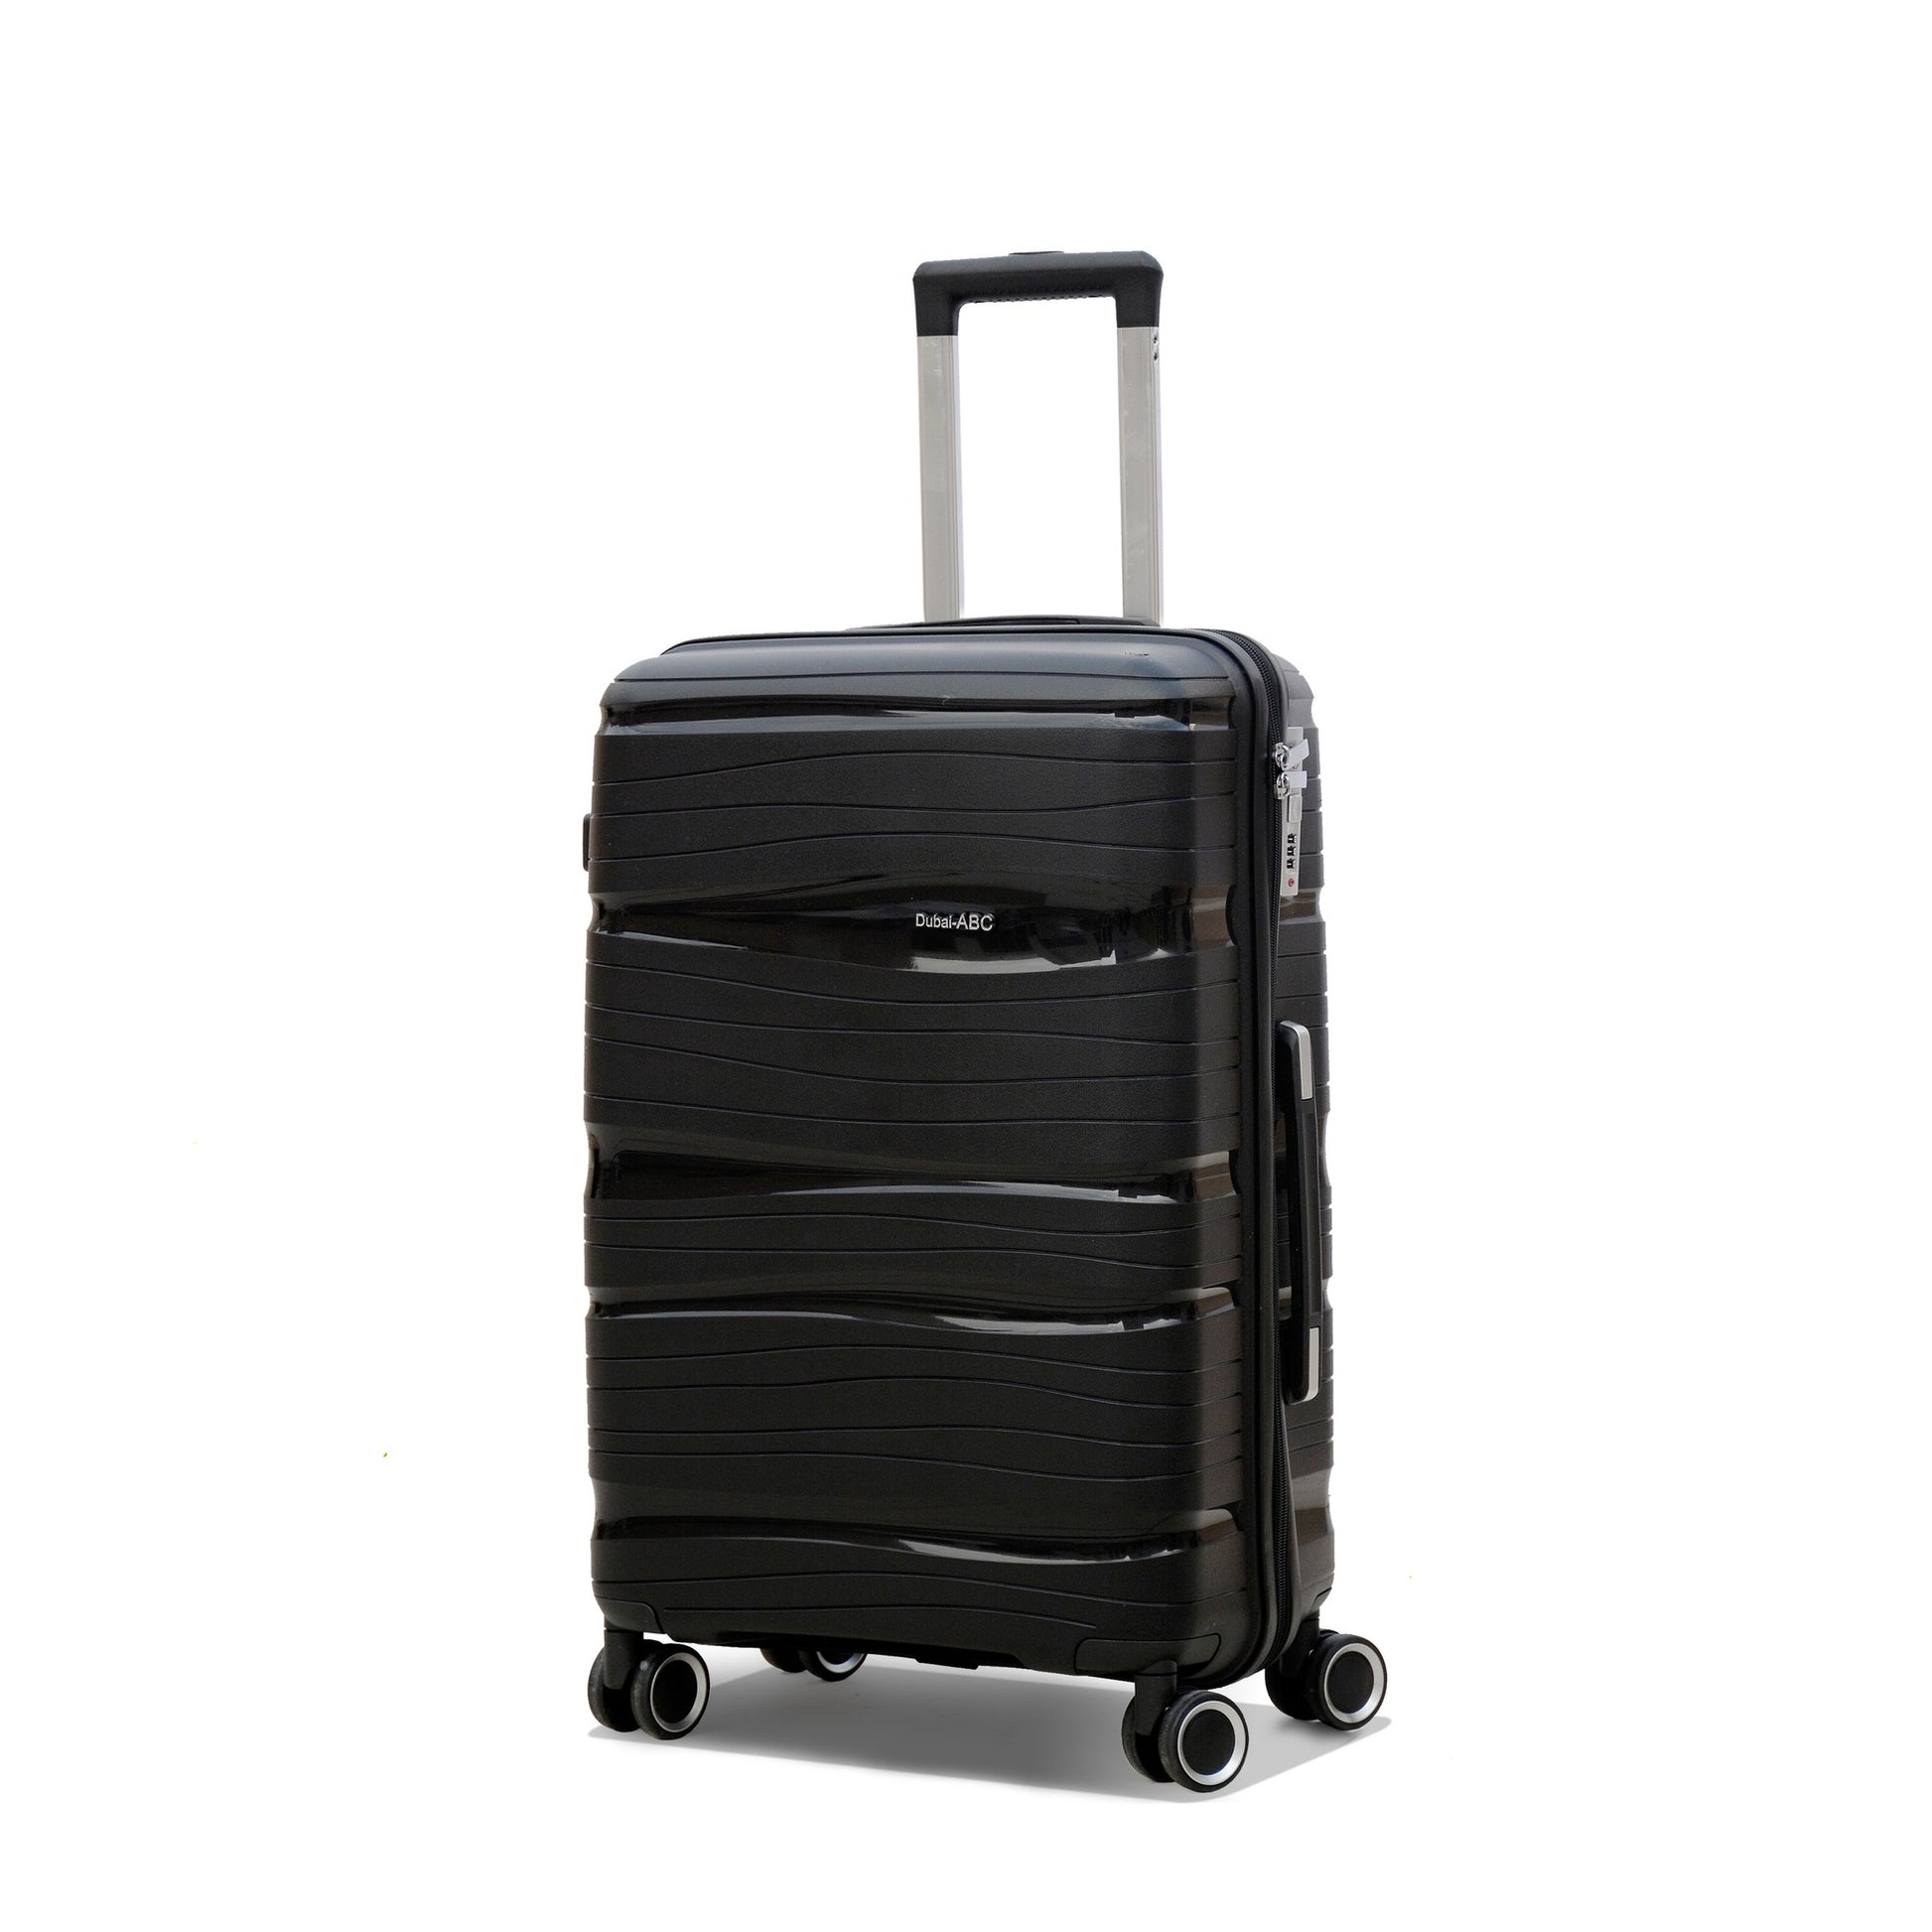 24" Black Colour Royal PP Luggage Lightweight Hard Case Trolley Bag With Double Spinner Wheel Zaappy.com